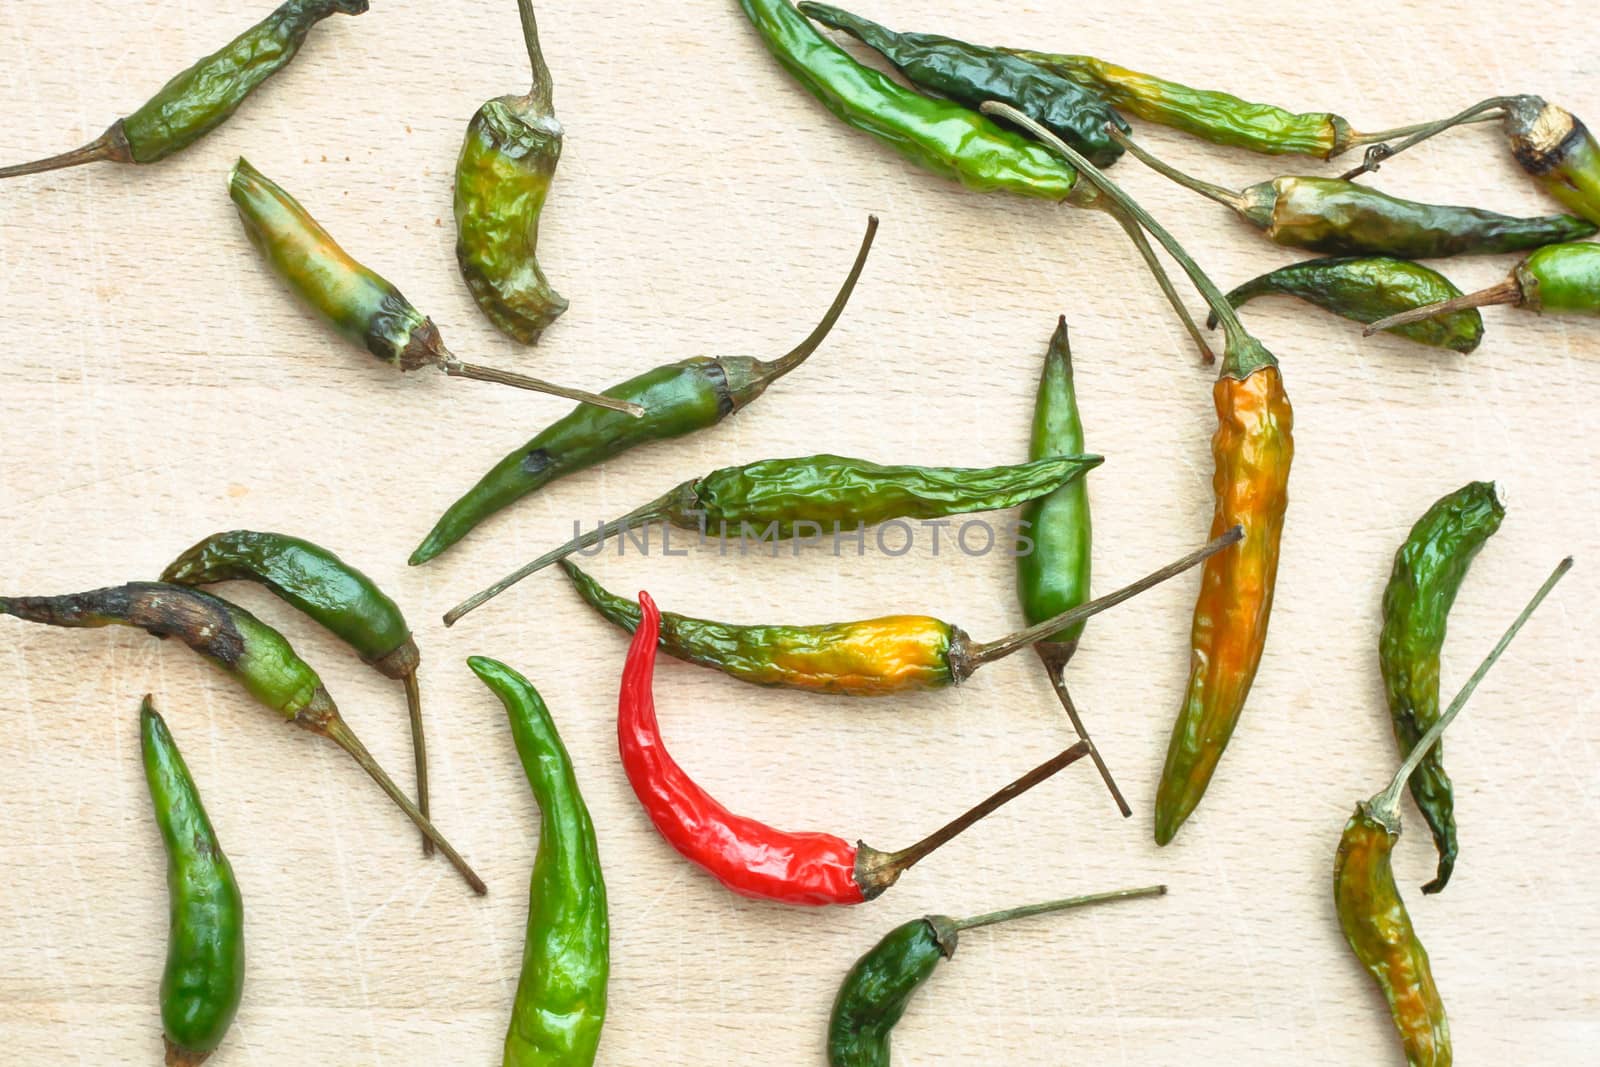 Selelction of chili peppers on a wooden surface